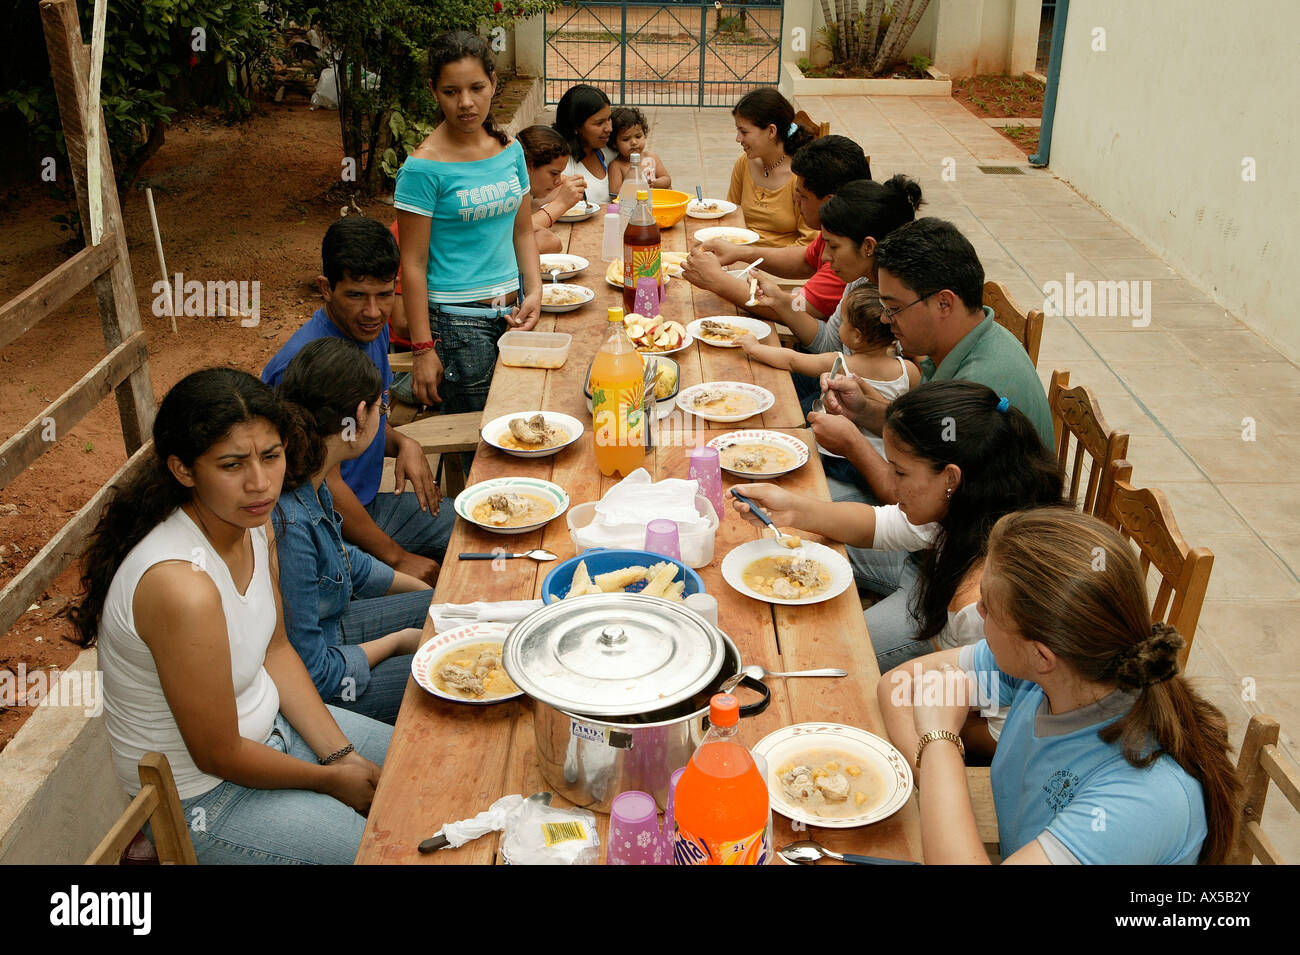 Group eating together on a terrace, Asuncion, Paraguay, South America Stock Photo